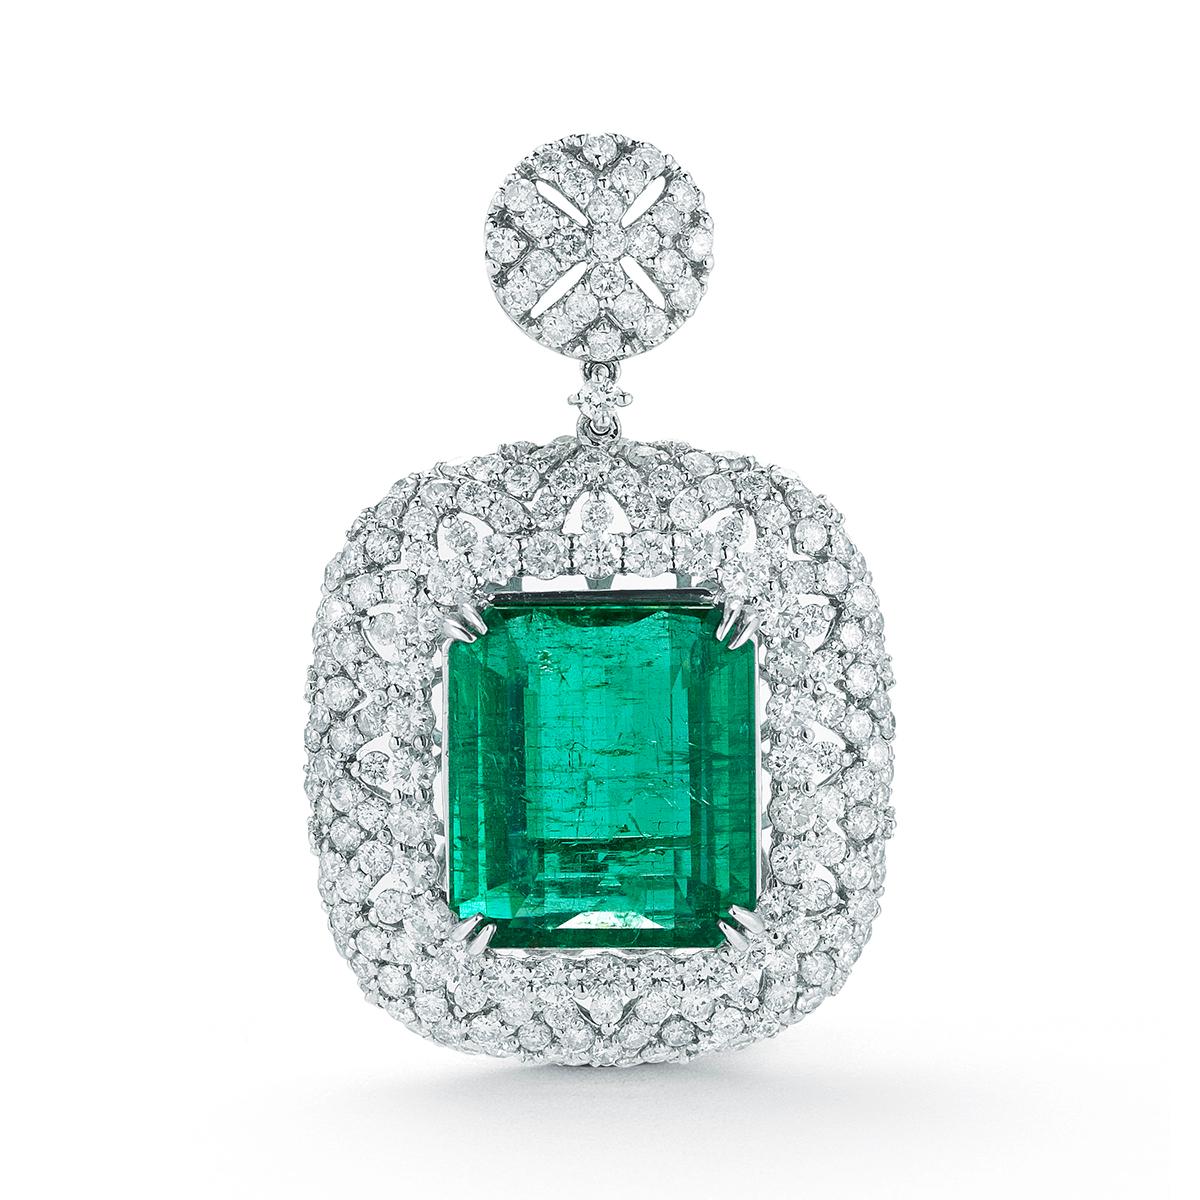 A vibrant Emerald shines in the center of this classic pendant 

Item: #02228
Metal: 18k W
Lab:	C.dunaigre
Color Weight: 15.30 ct.
Diamond Weight: 3.90 ct.